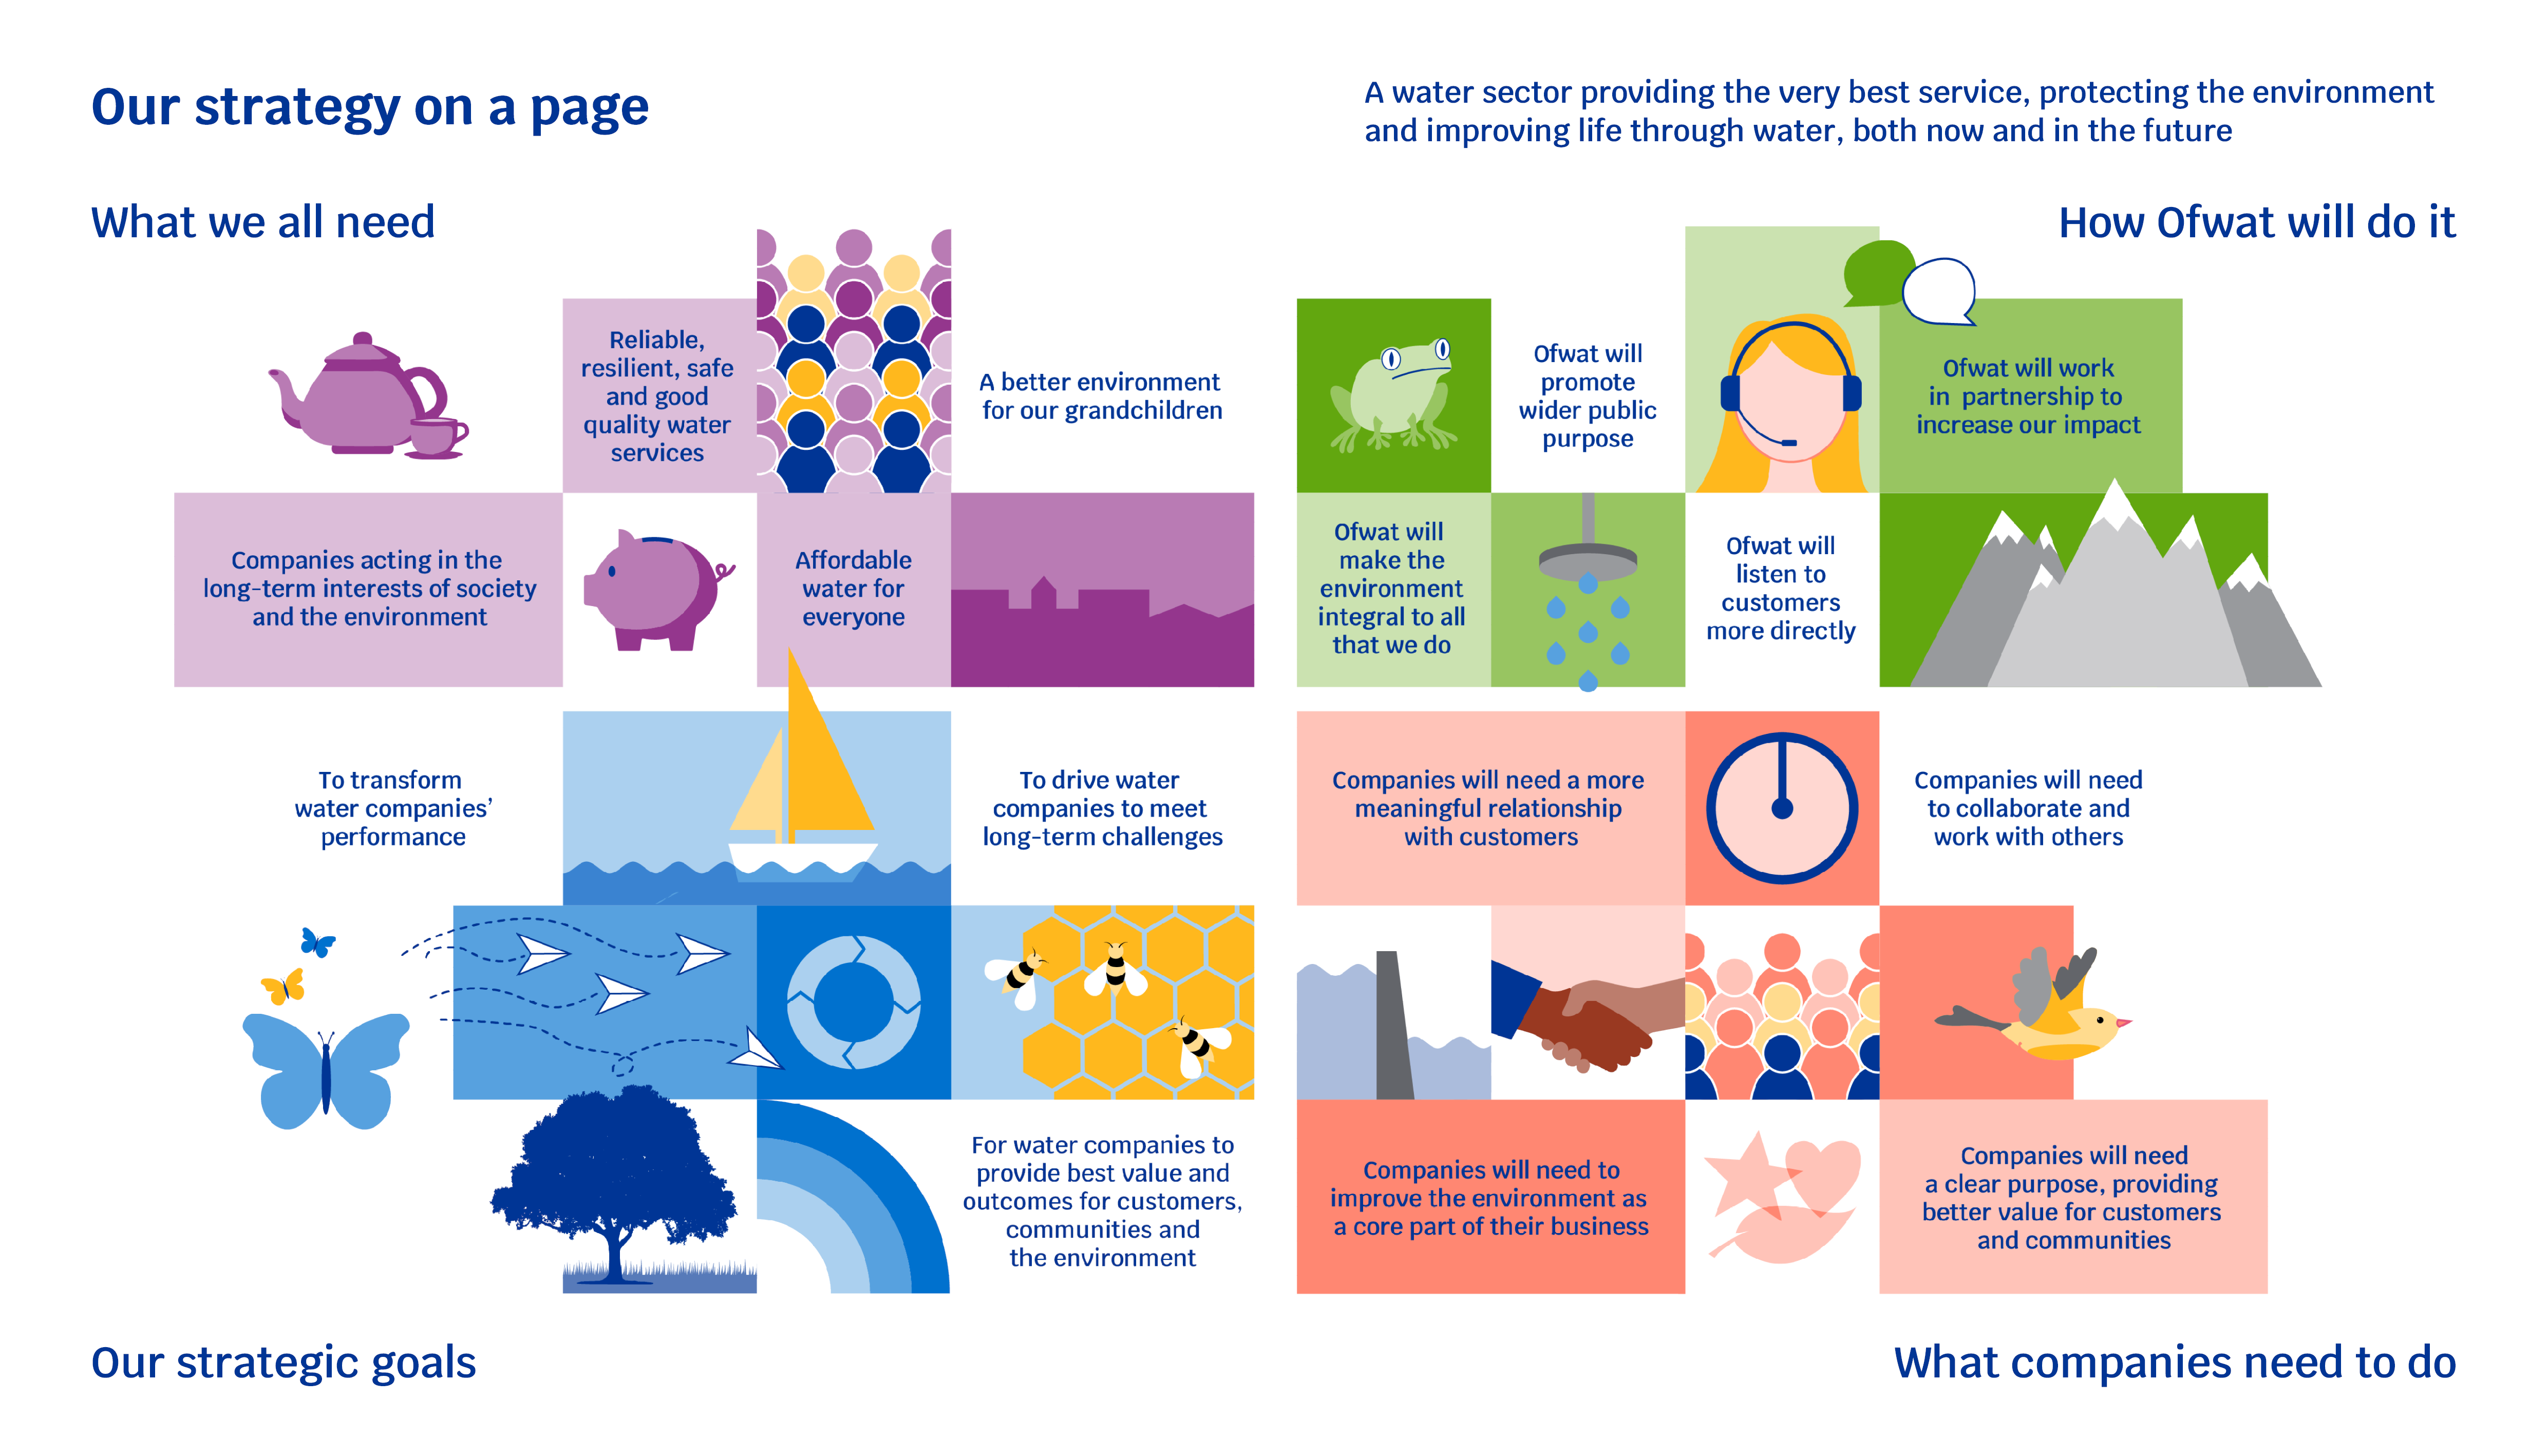 Ofwat's strategy on page, highlighting what we all need, our strategic goals, what companies need to do and how Ofwat will act. Text details in the main strategy document